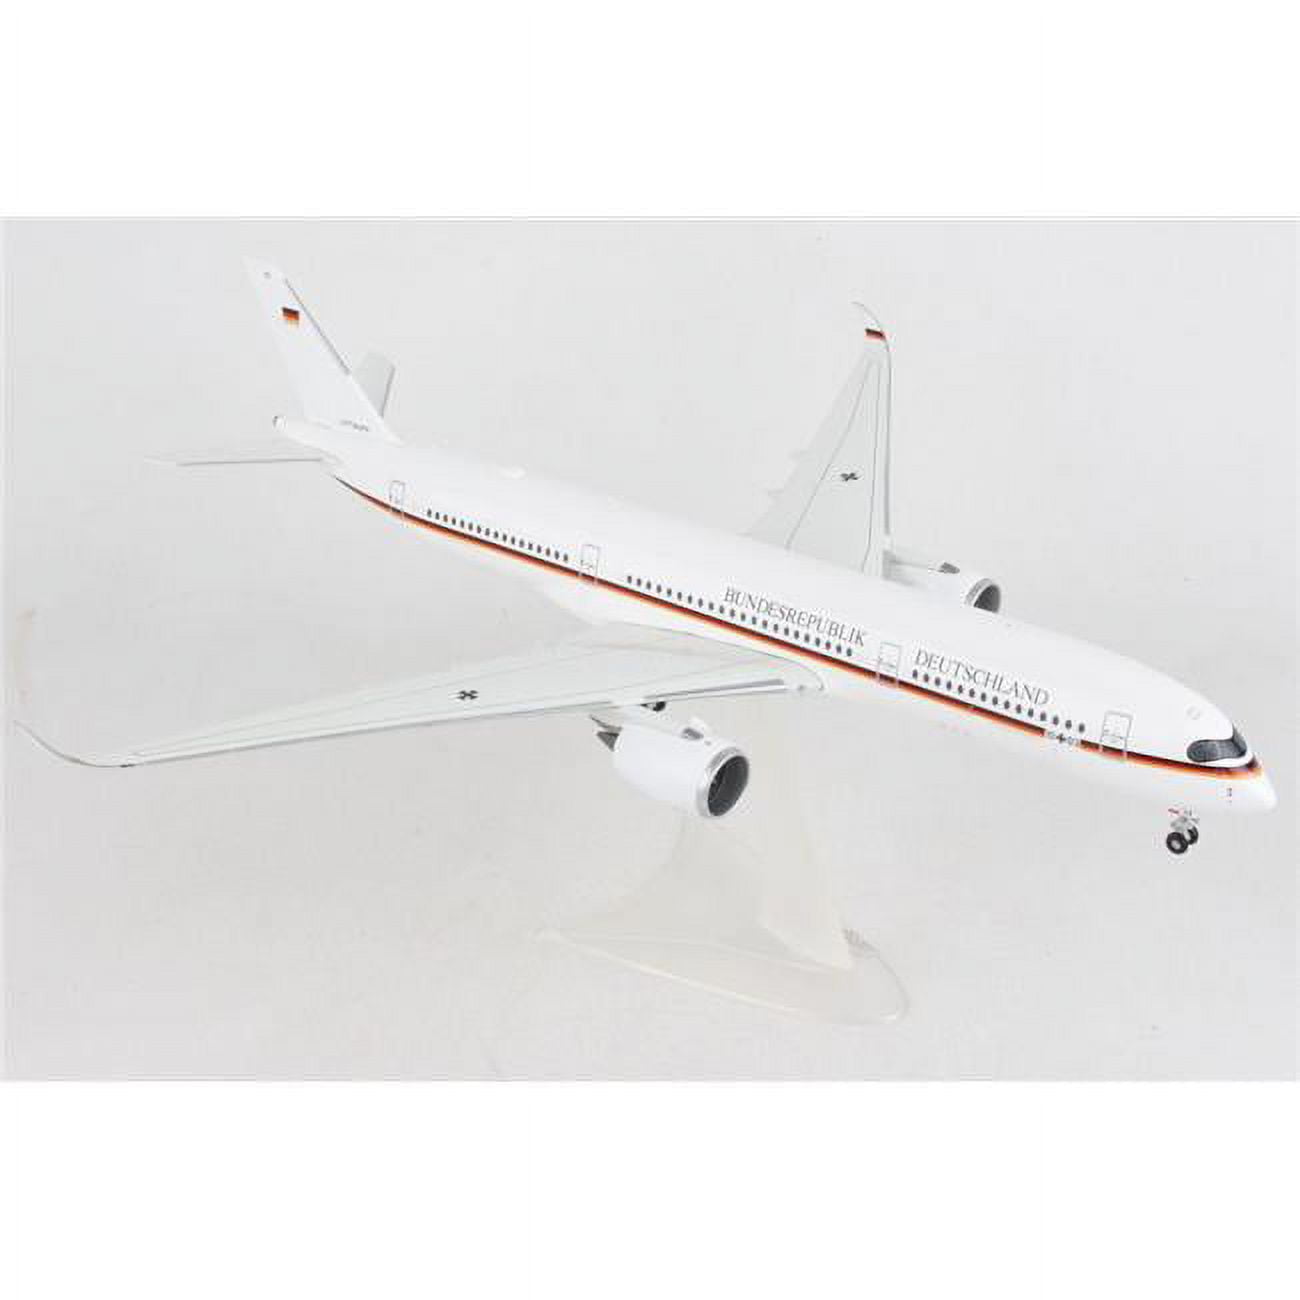 HE570374 1-200 Scale Luftwaffe A350-900 Flugbereischaft Model Airplane -  Herpa Scale Military